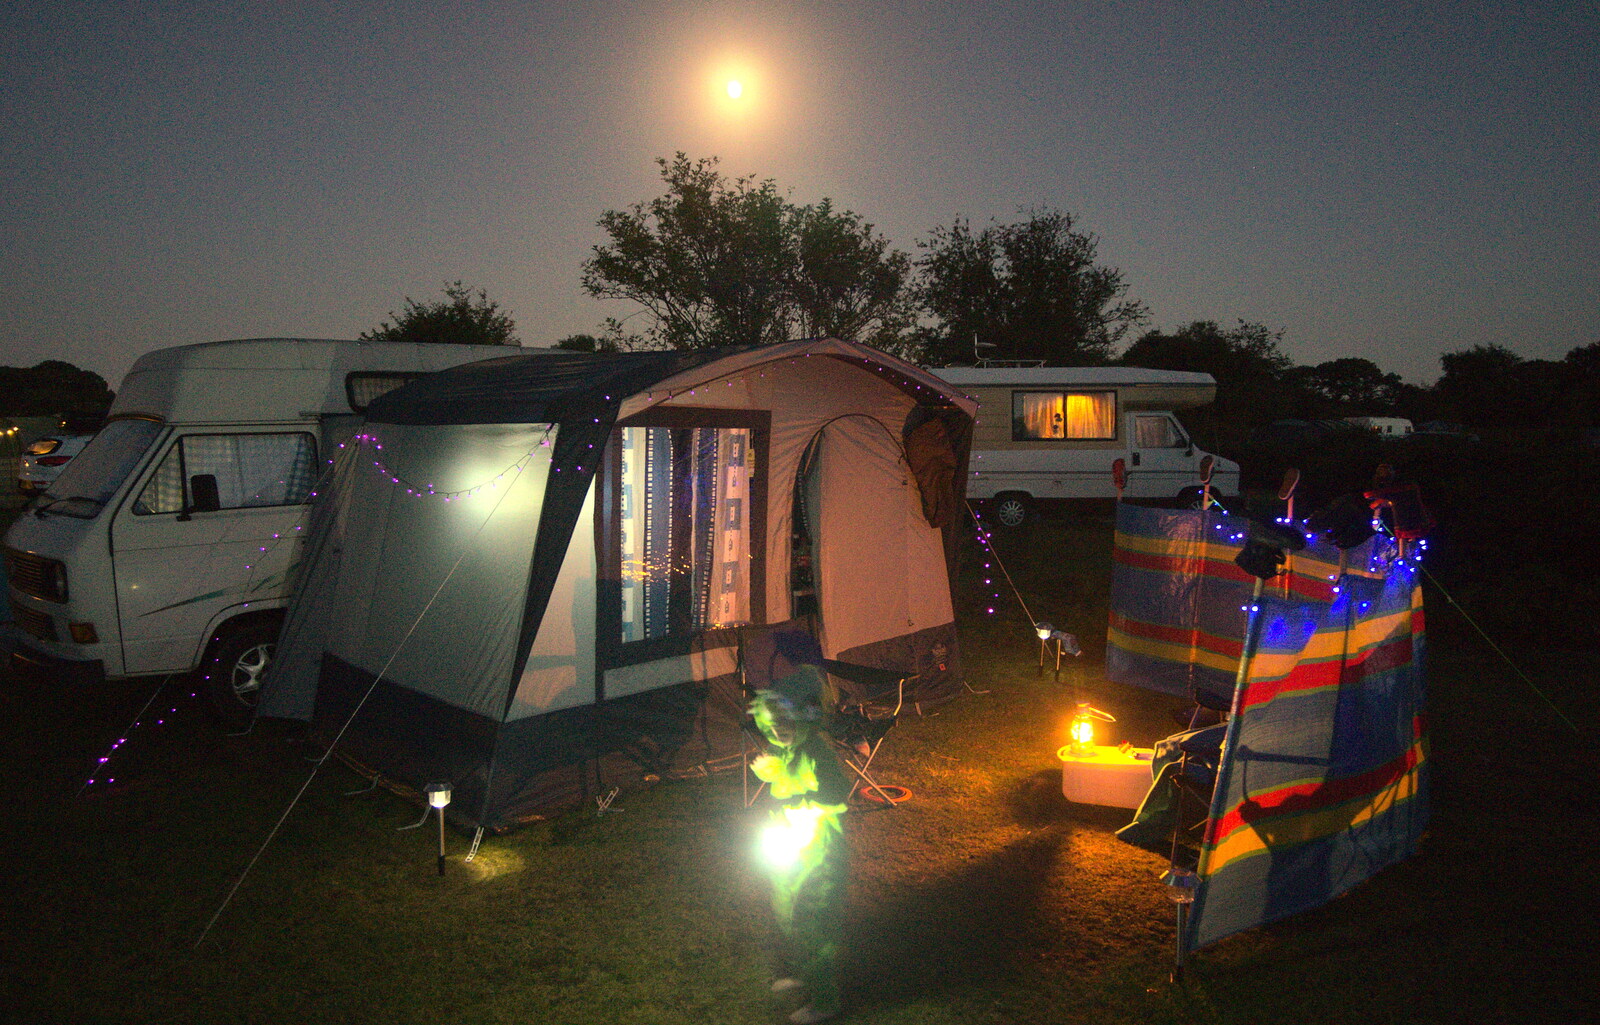 The van and awning in the moonlight from Camping at Roundhills, Brockenhurst, New Forest, Hampshire - 29th August 2015